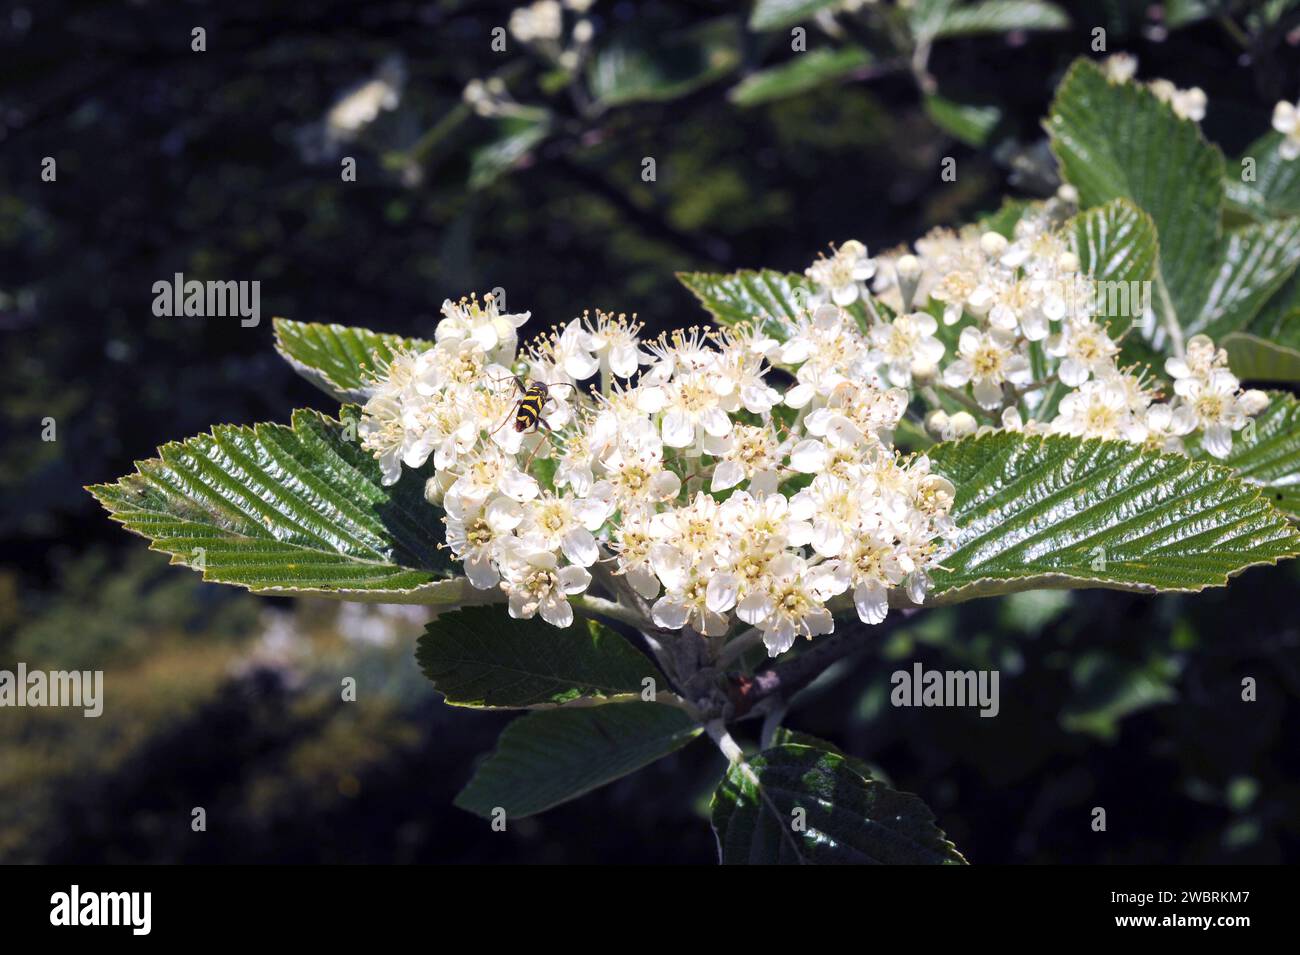 Whitebeam (Sorbus aria) is a deciduous tree native to Europe and north Africa. Flowers detail with the coleoptera Clytus arietis. This photo was taken Stock Photo